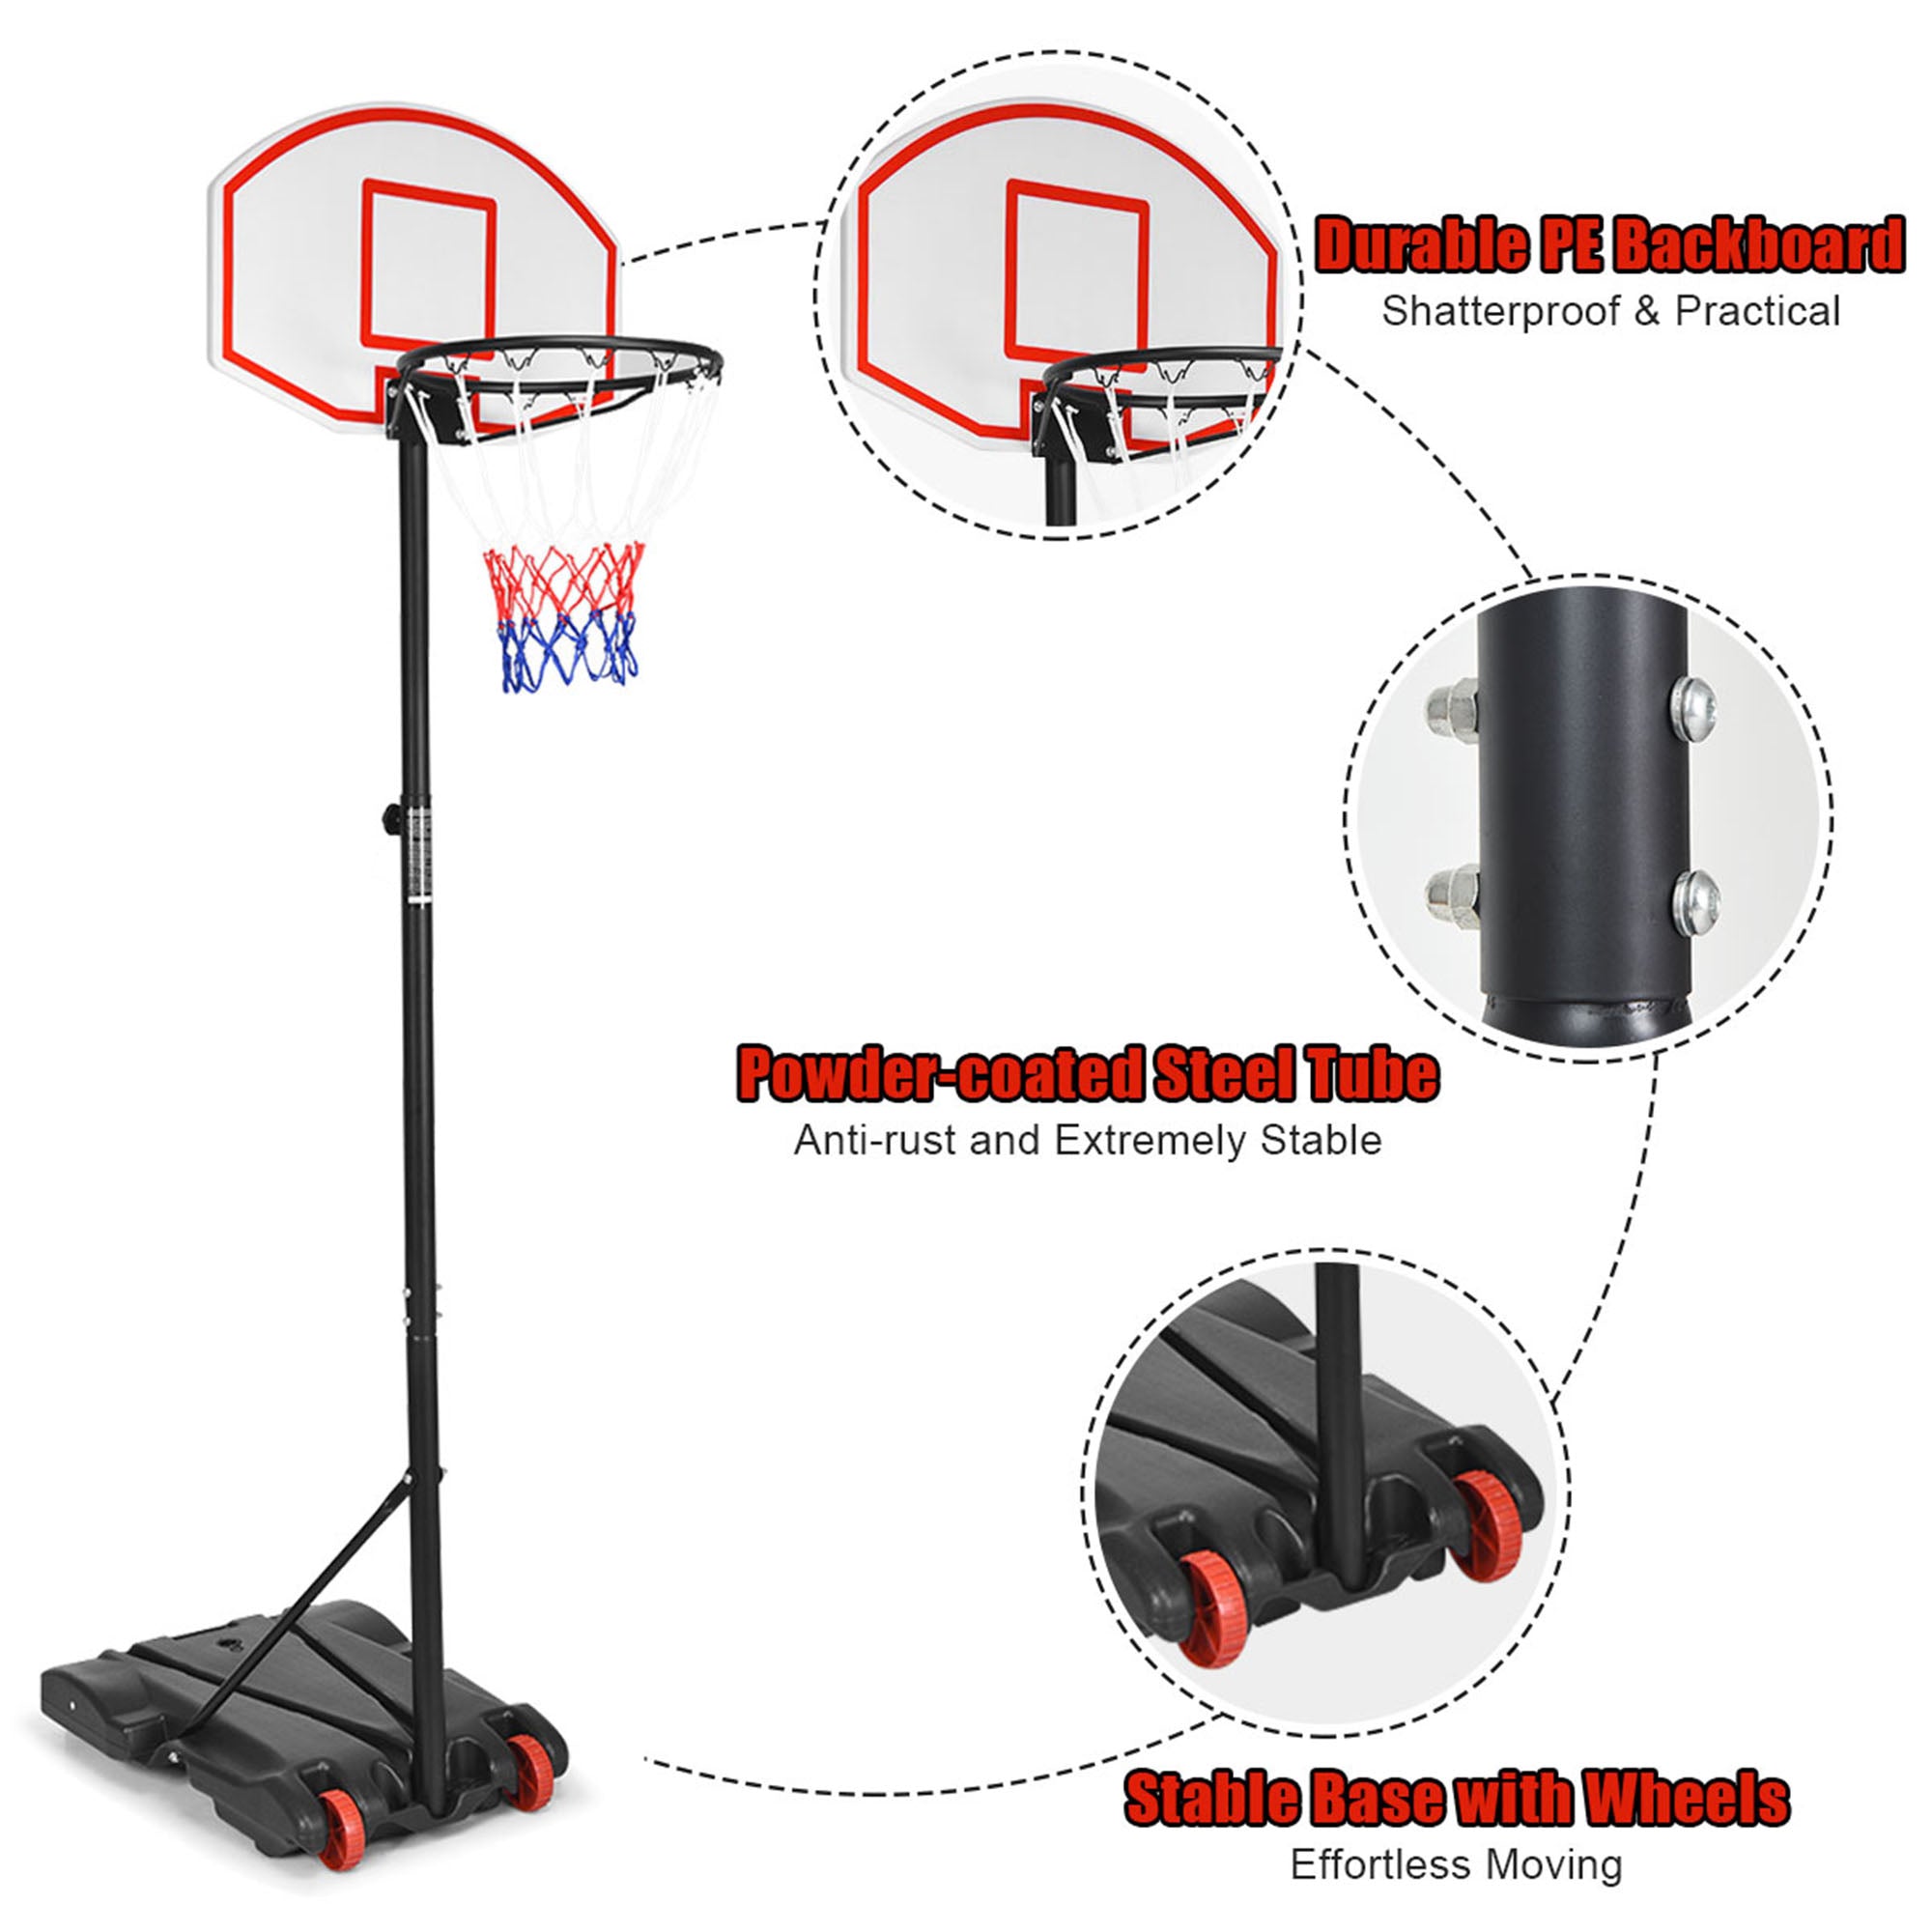 SKONYON Kids Portable Height-Adjustable Sports Basketball Hoop Backboard System Stand with Wheels - Black